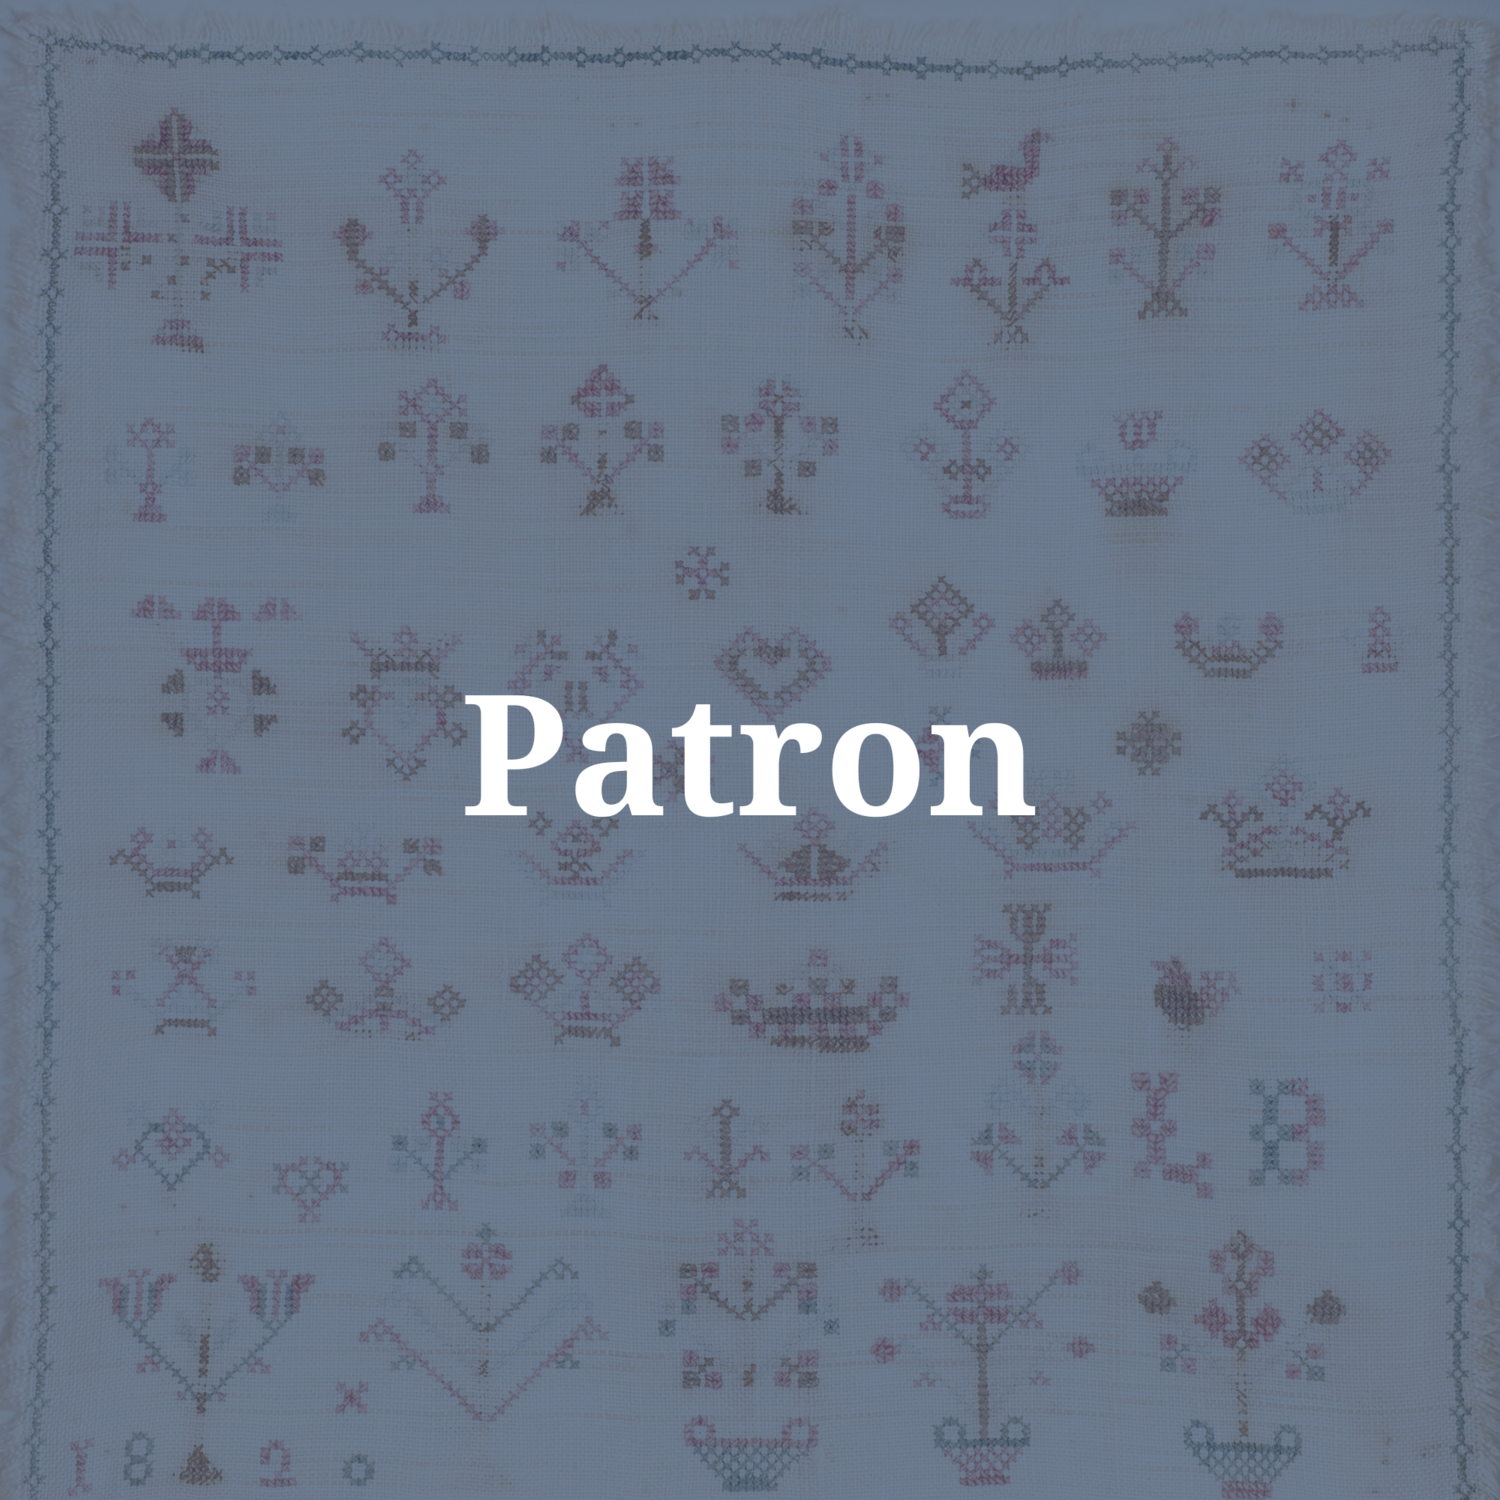 Collections Guild - Patron Membership